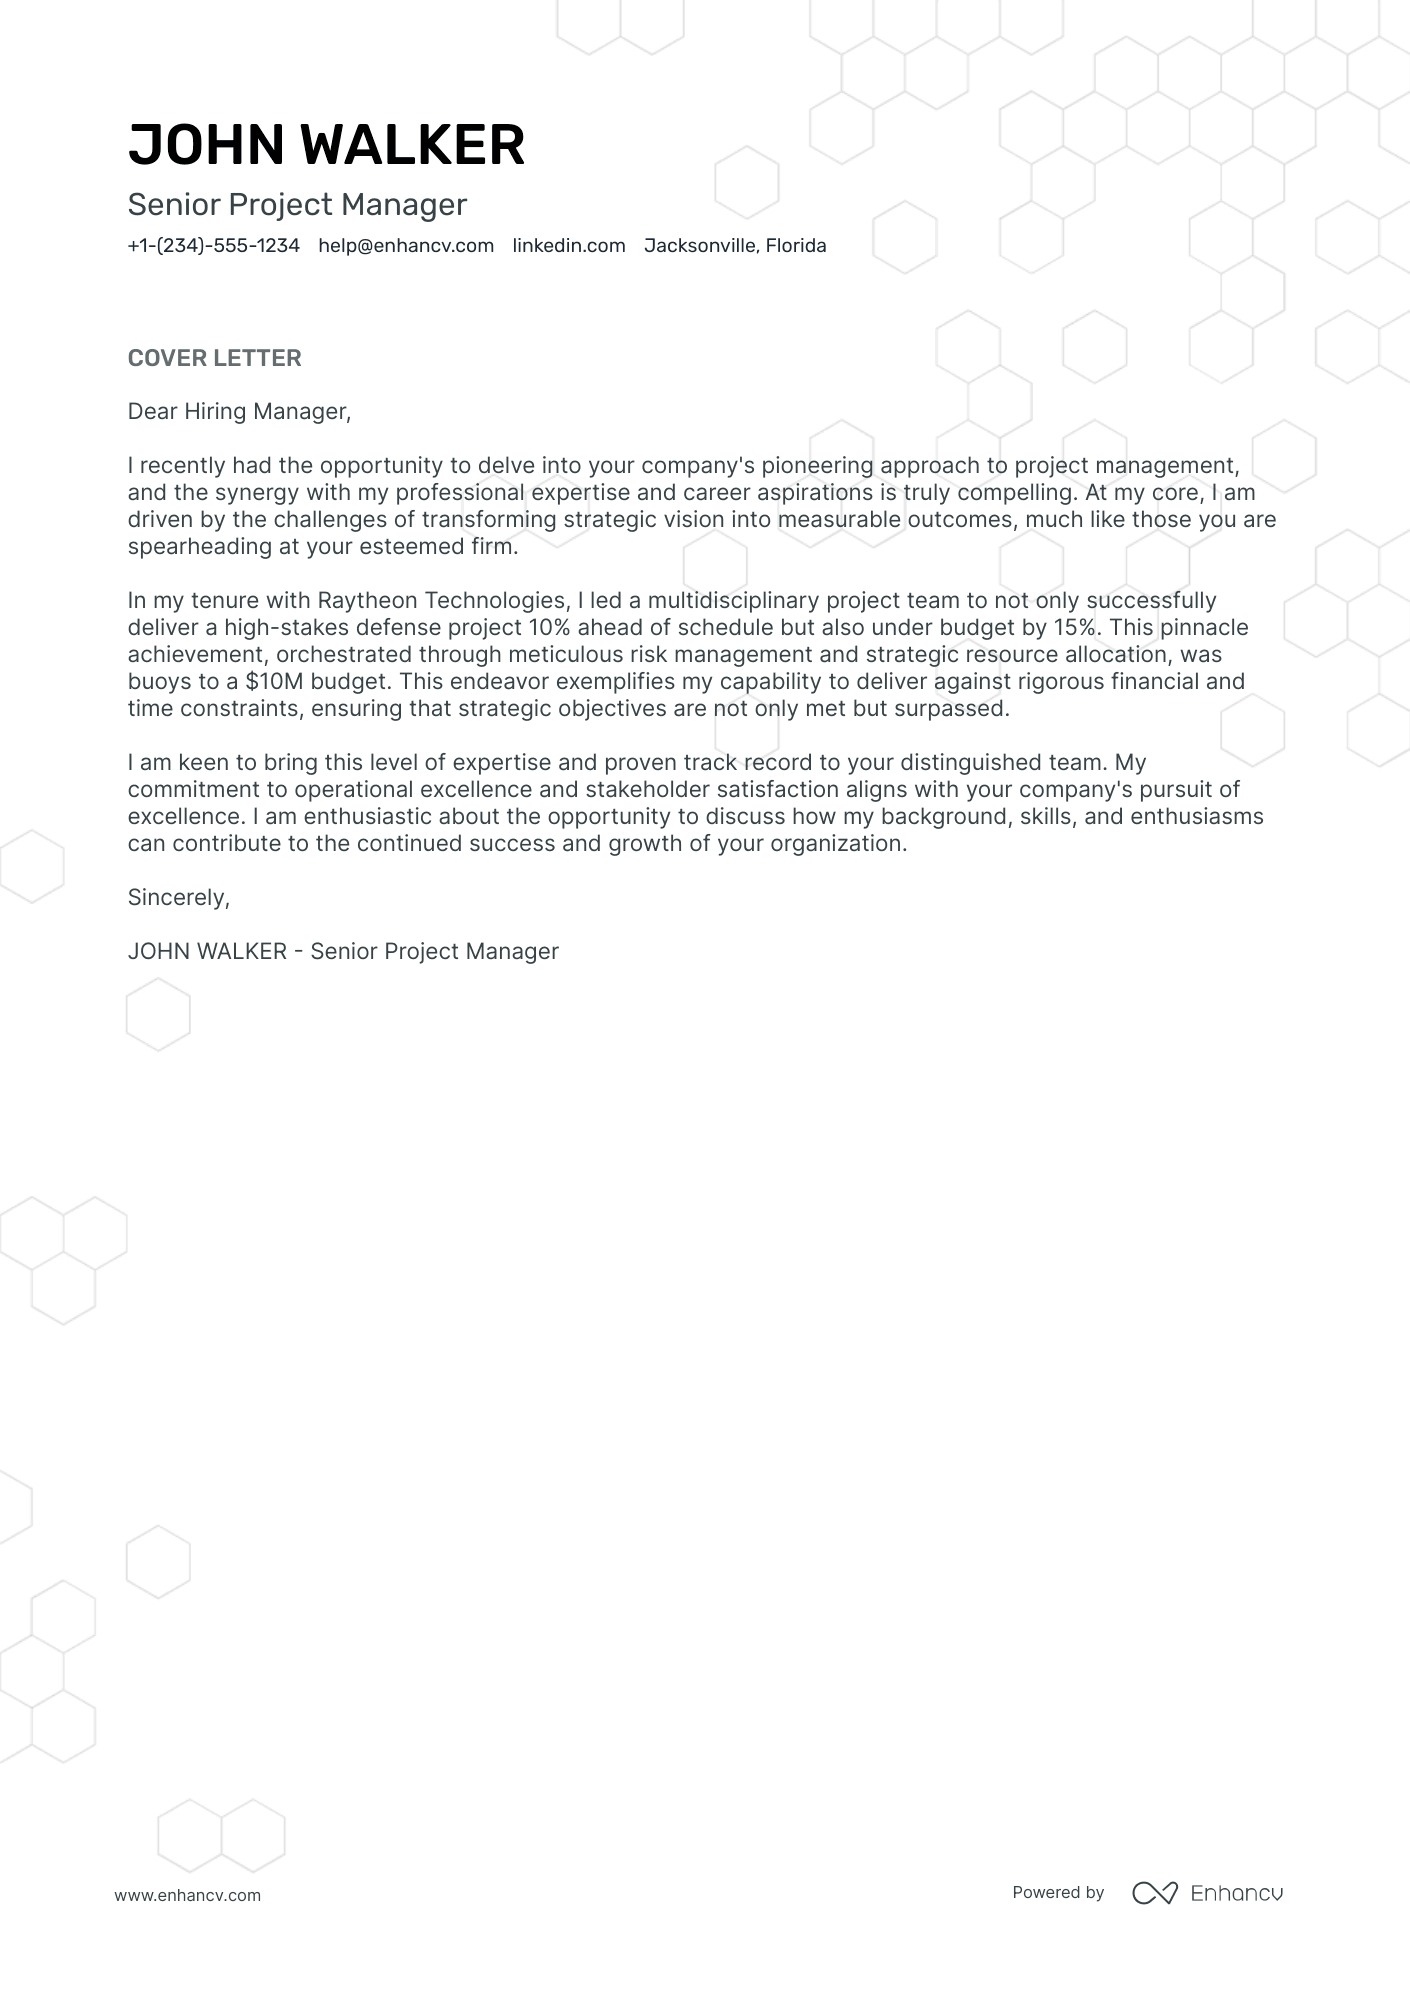 application letter for it director